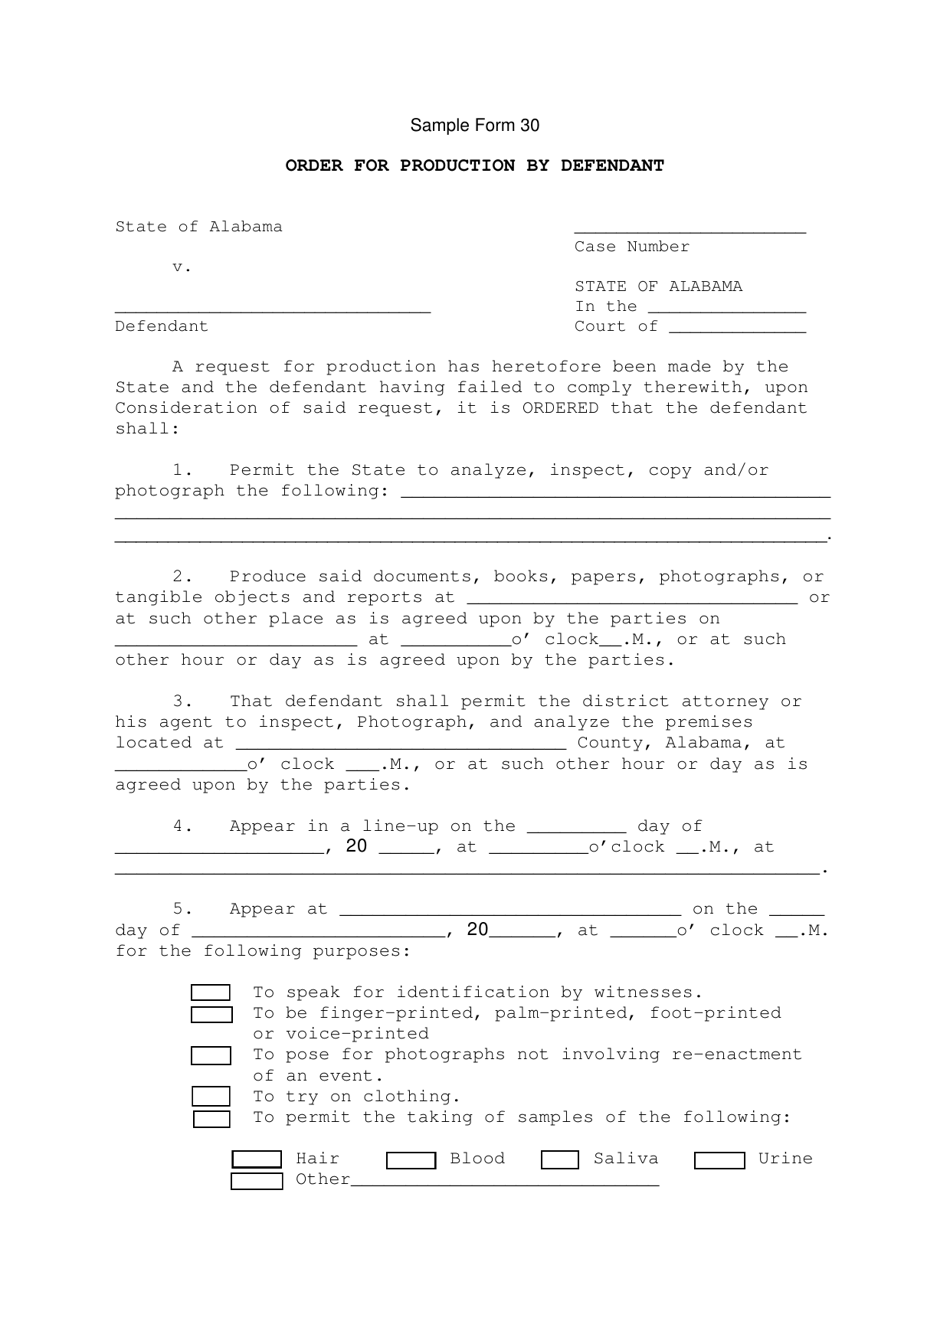 Sample Form 30 Order for Production by Defendant - Alabama, Page 1